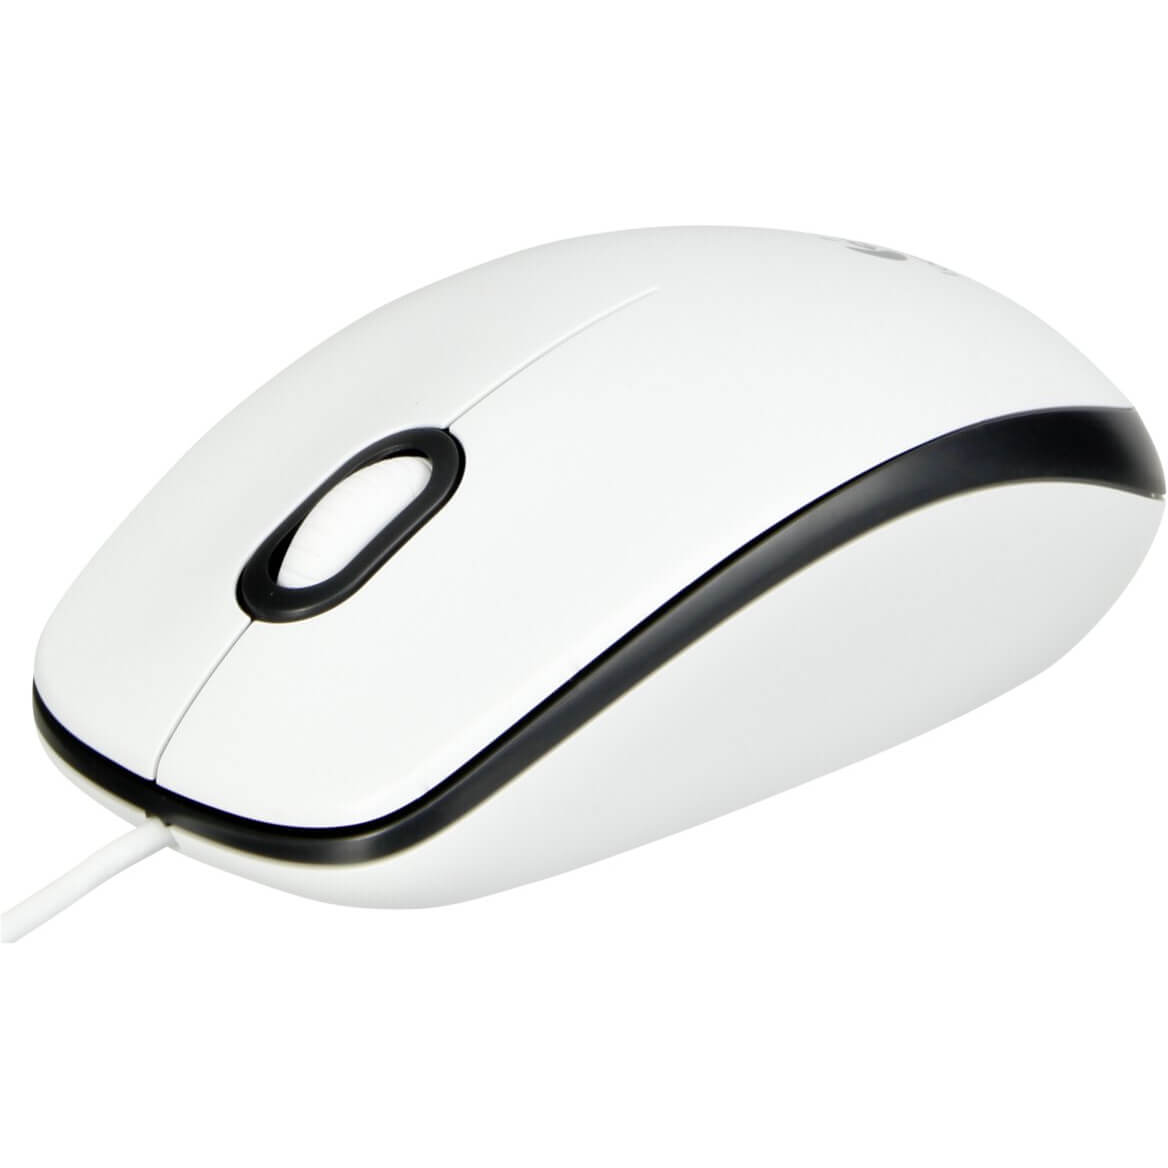  Mouse USB wired Logitech M100, Alb 